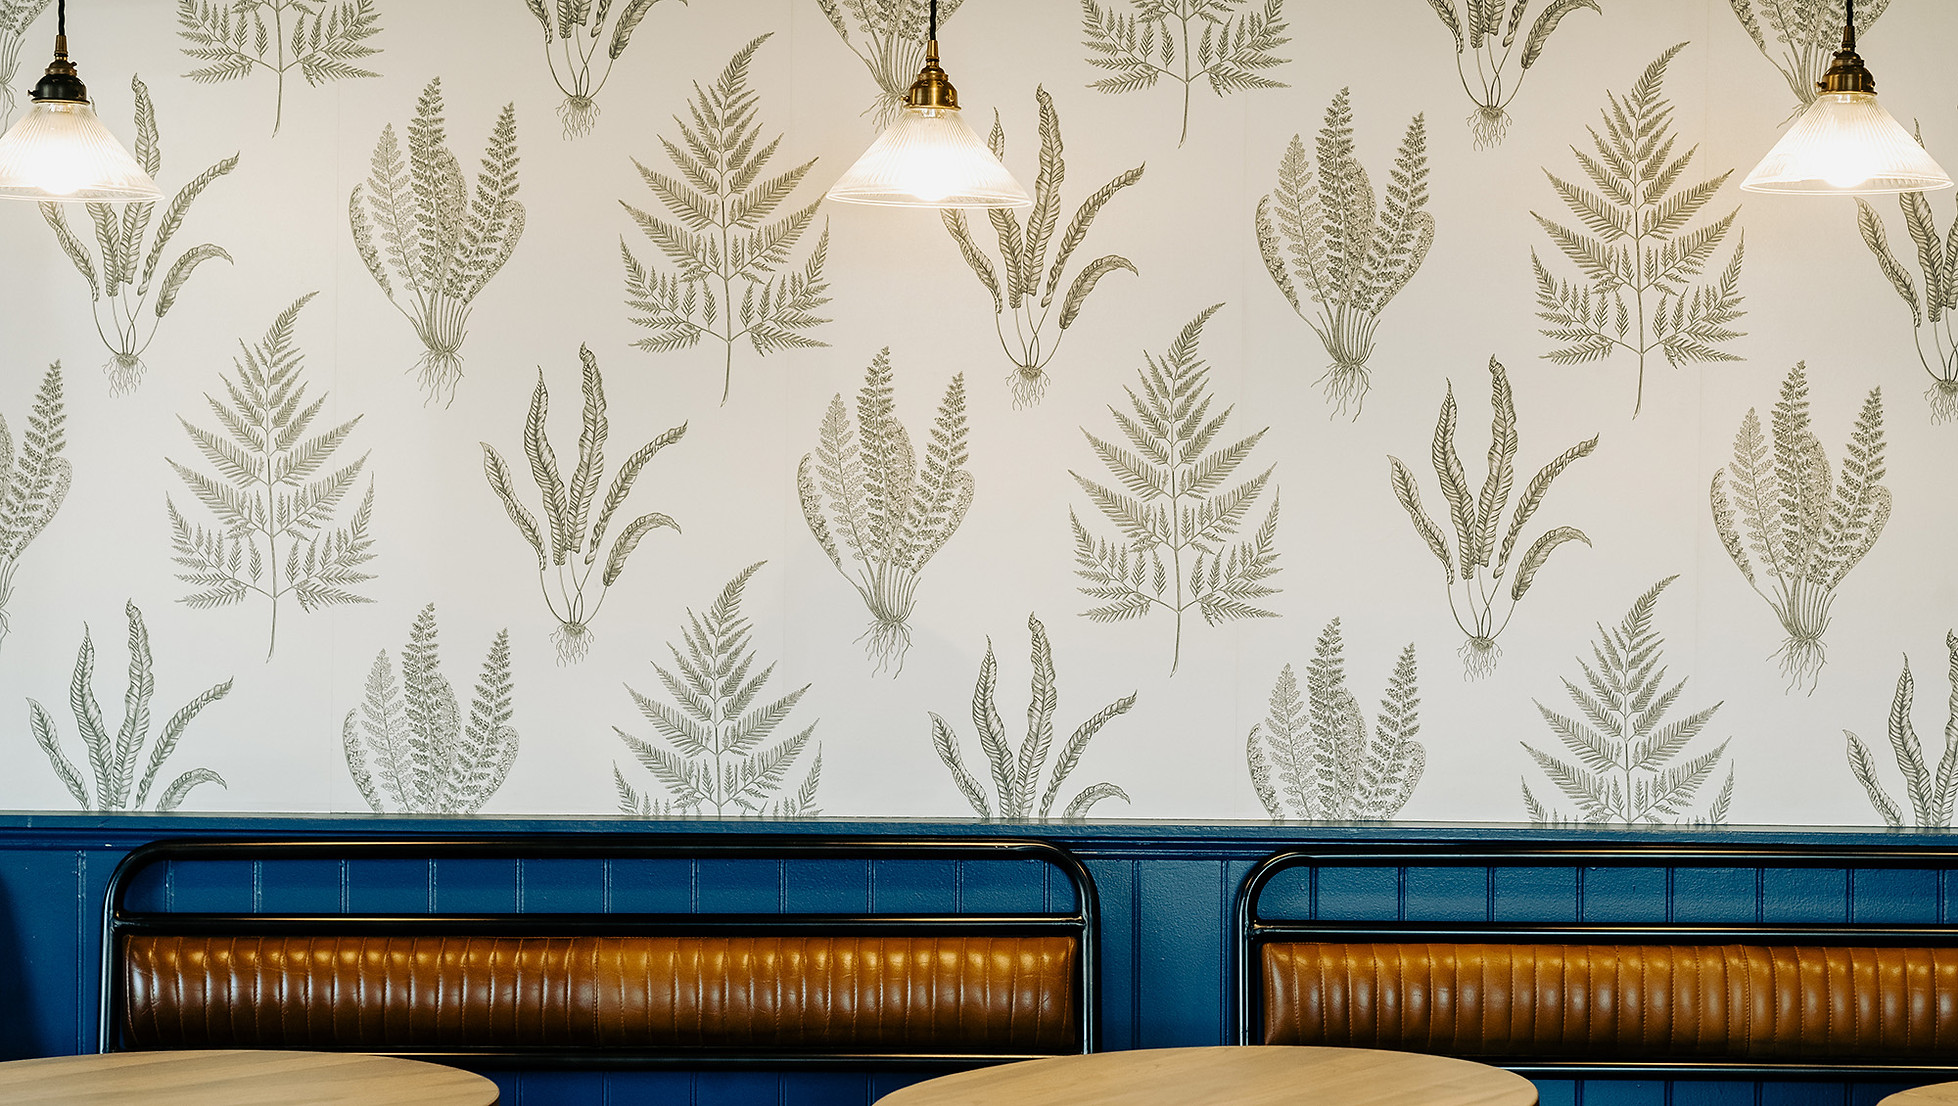 Pub interior with frond wallpaper and brown benches